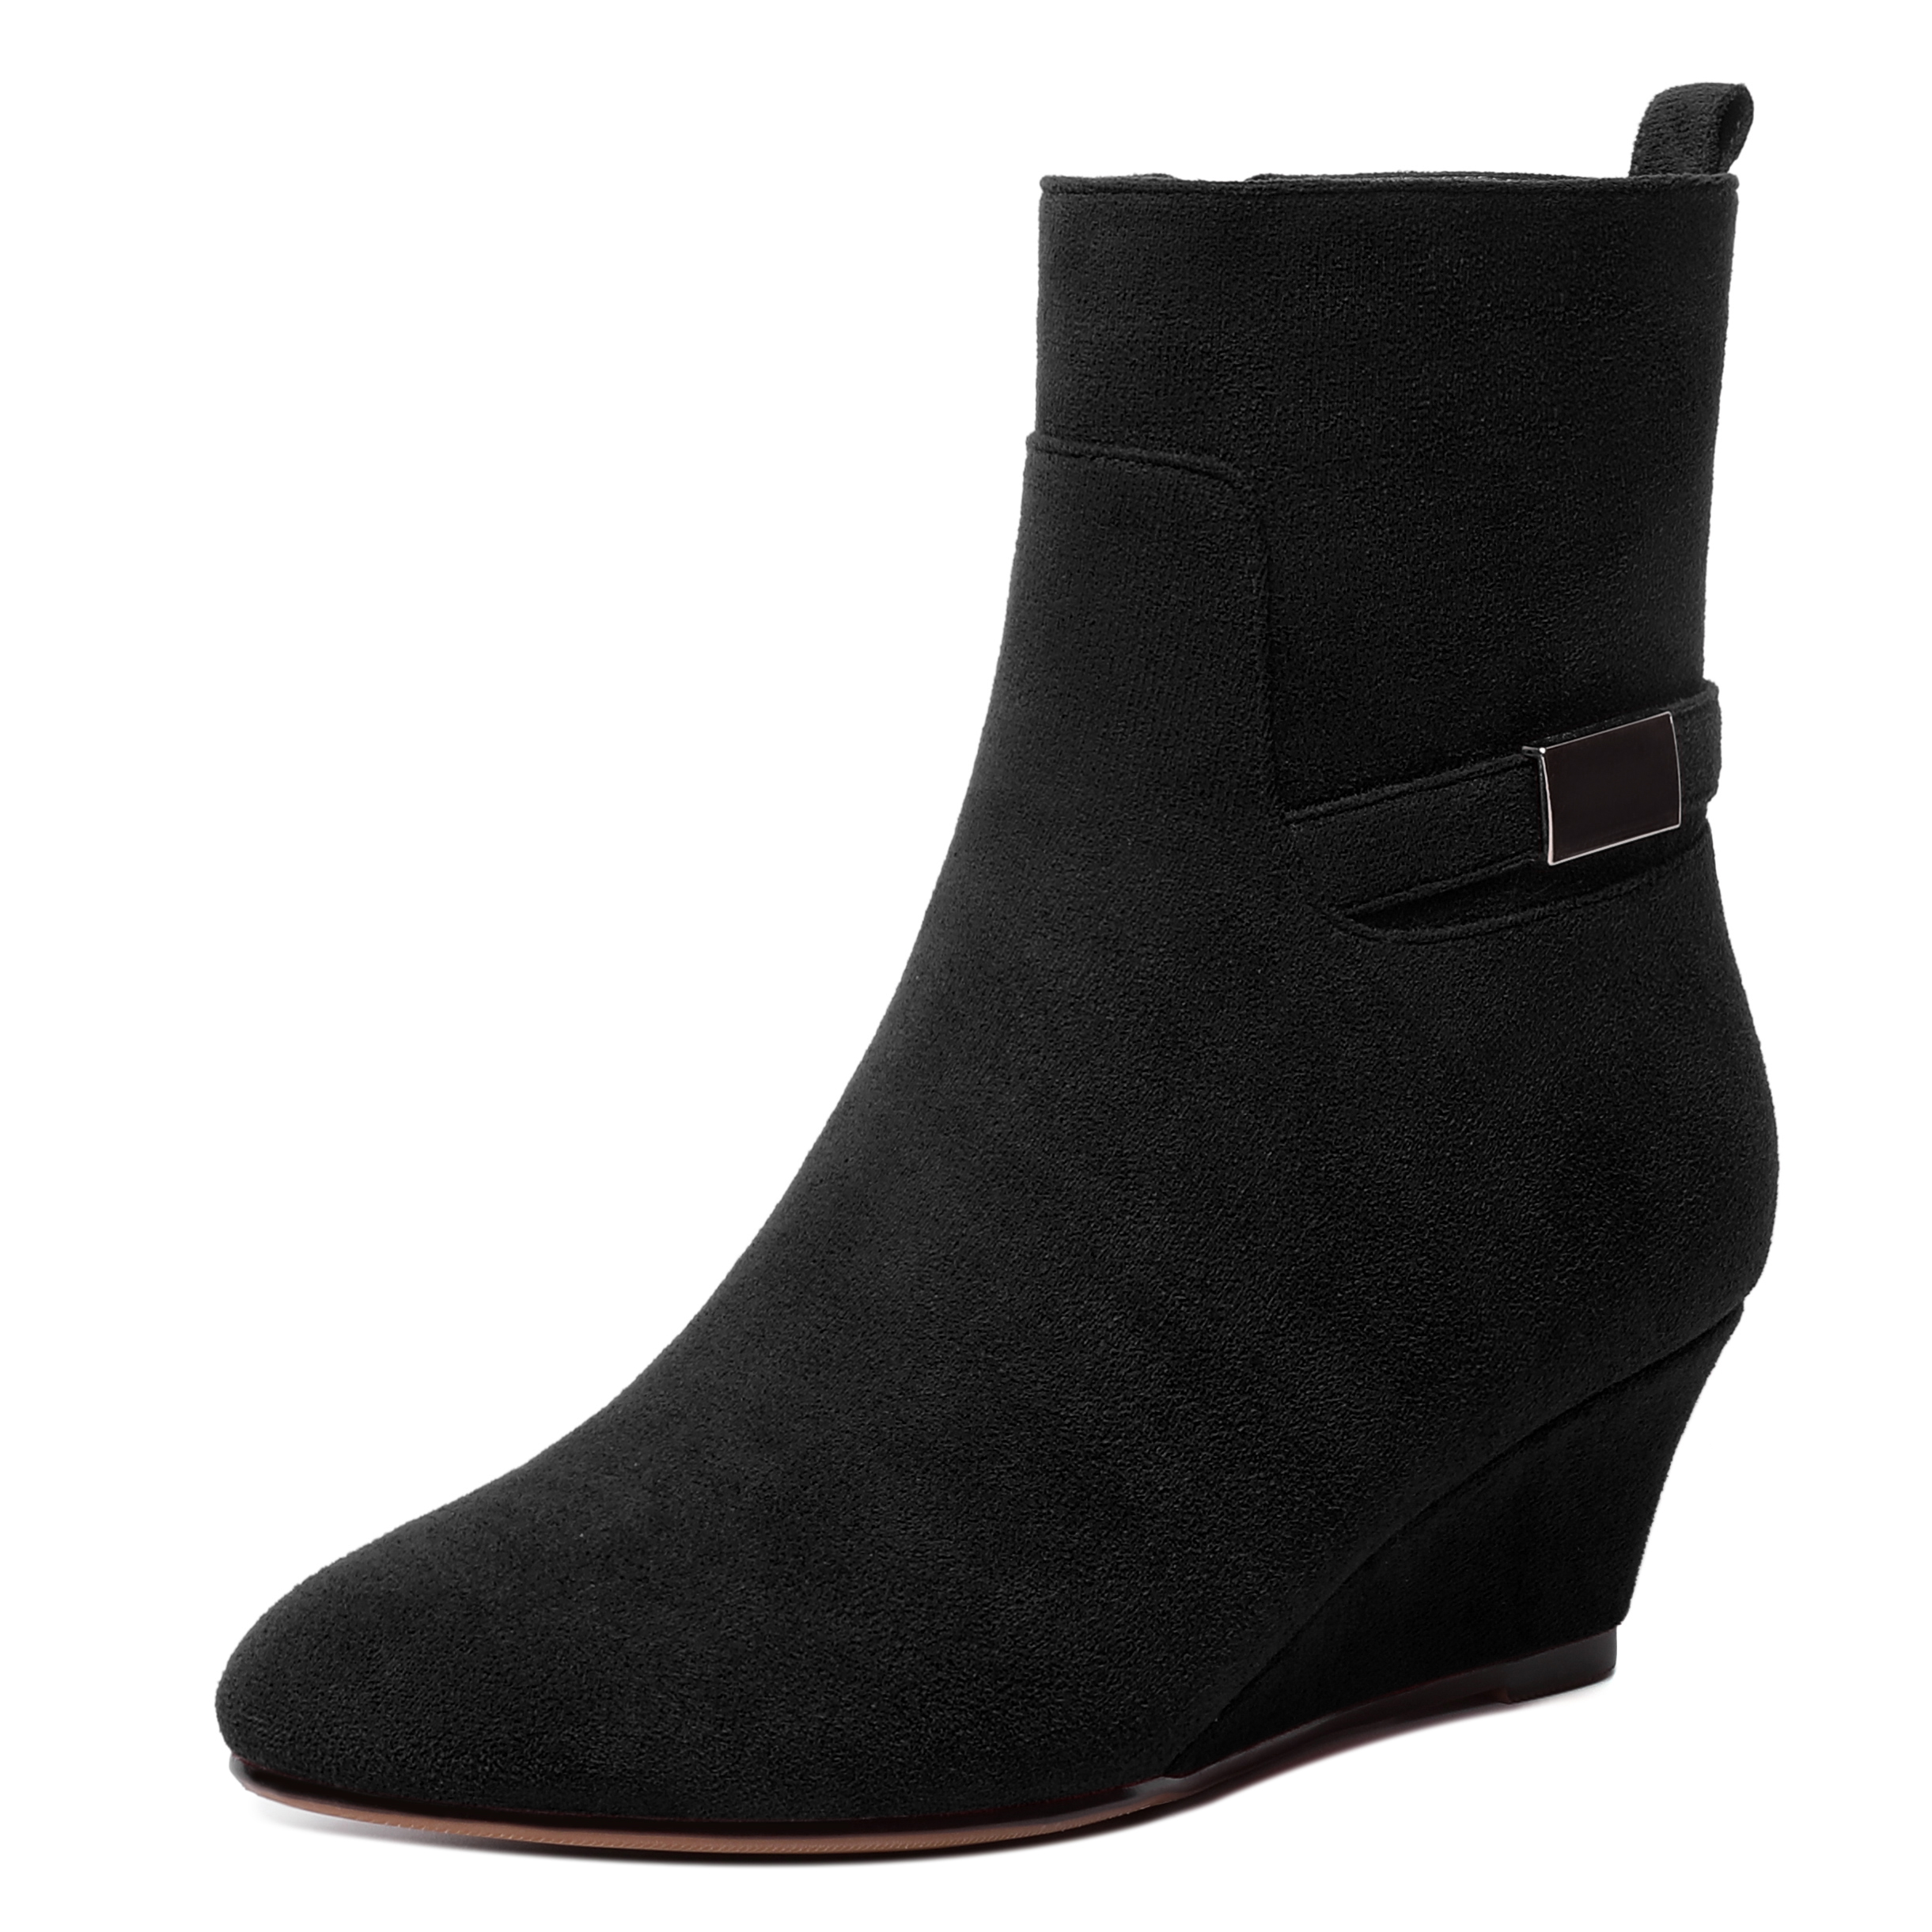 Women's Casual Cold Weather Winter Suede Round Toe Outdoor Wedge Low Heel Ankle High Boots 2 Inch